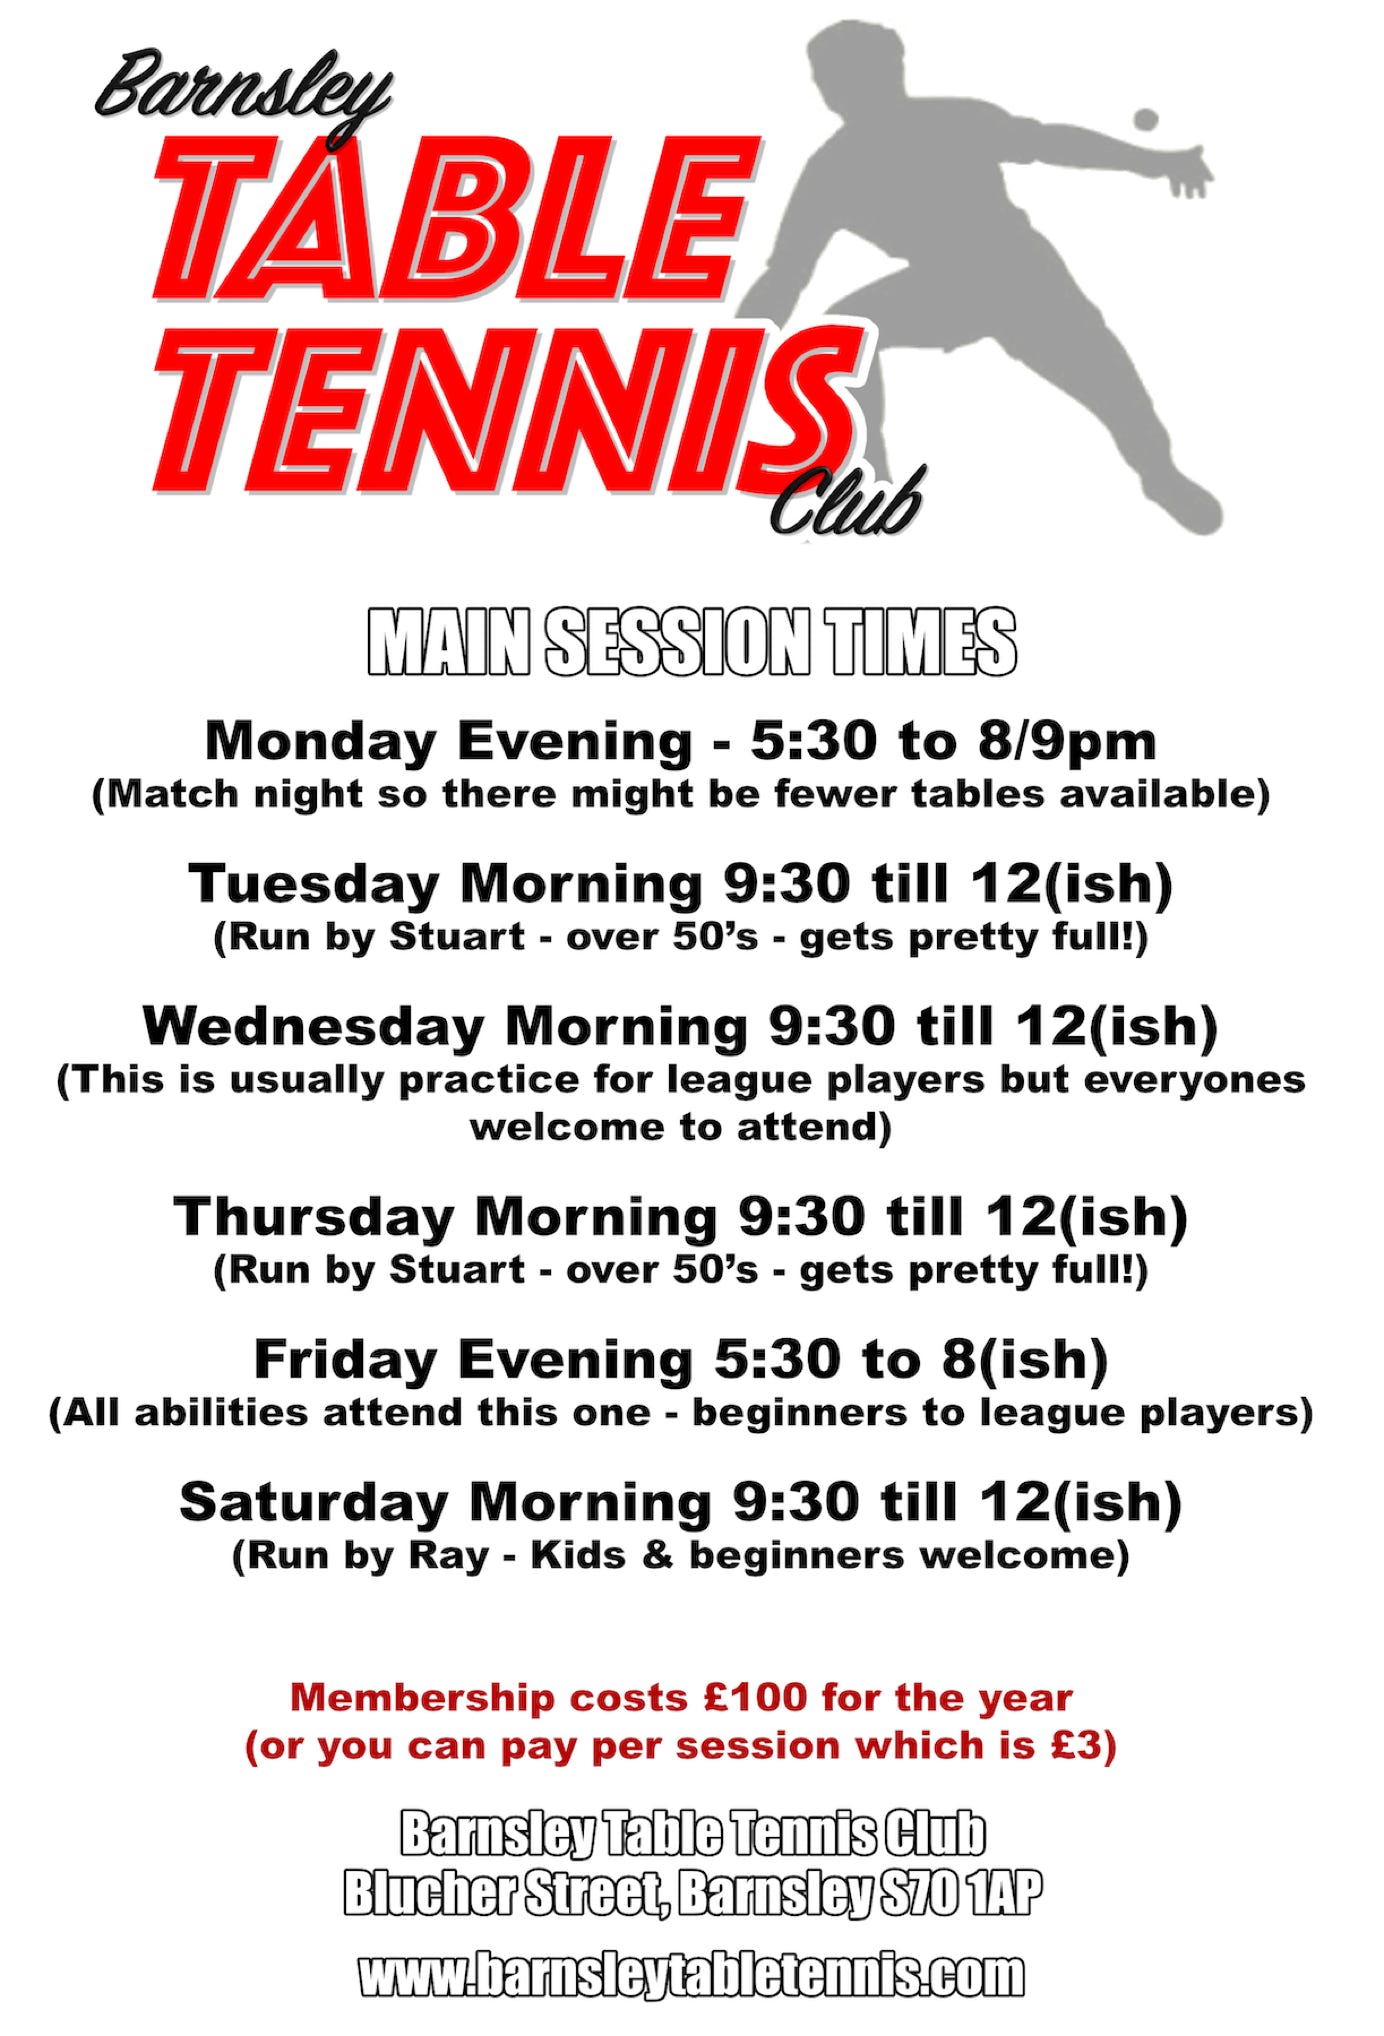 Barnsley table tennis - opening times, membership costs and address.